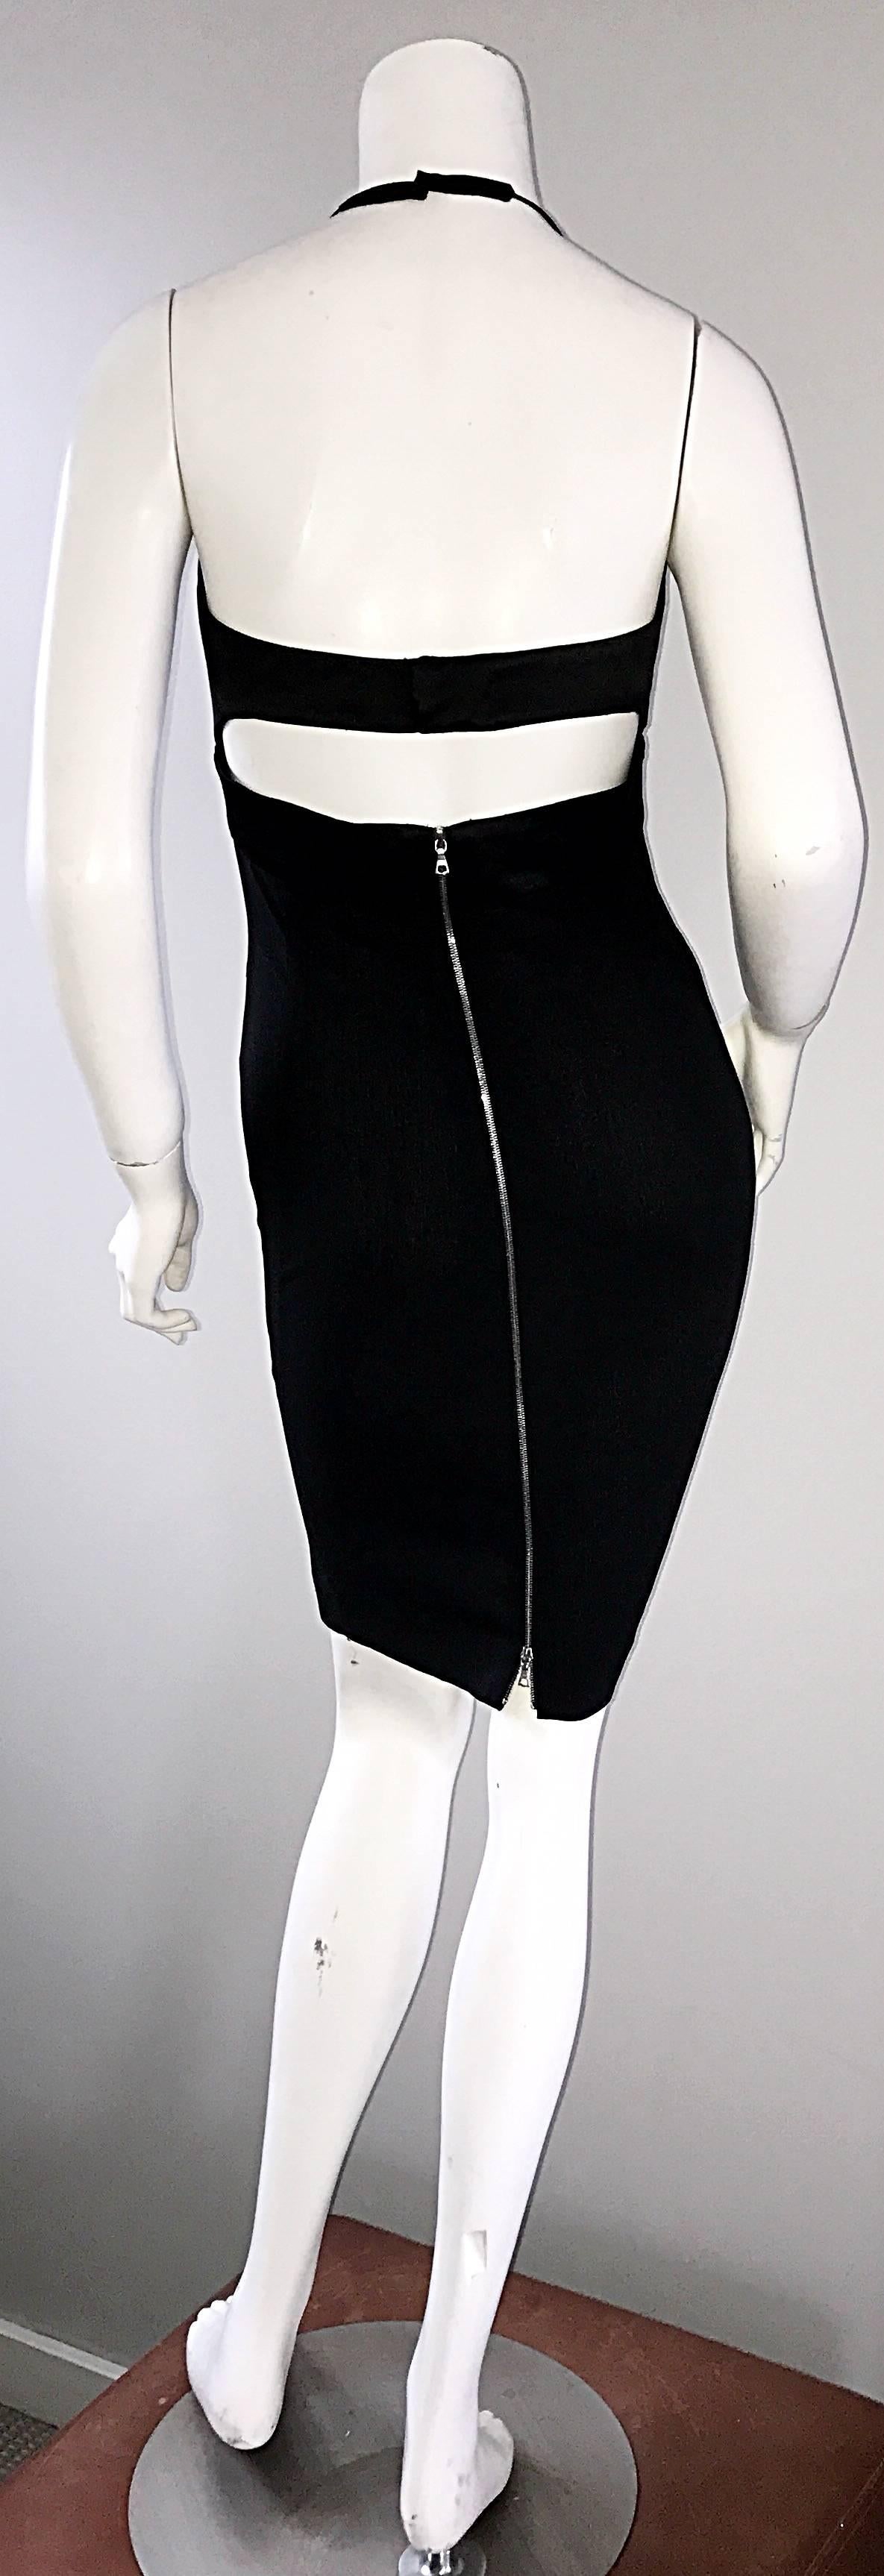 Narcisco Rodriguez First Collection 1997 Black Sexy Bodycon Cut - Out Back Dress In Excellent Condition For Sale In San Diego, CA